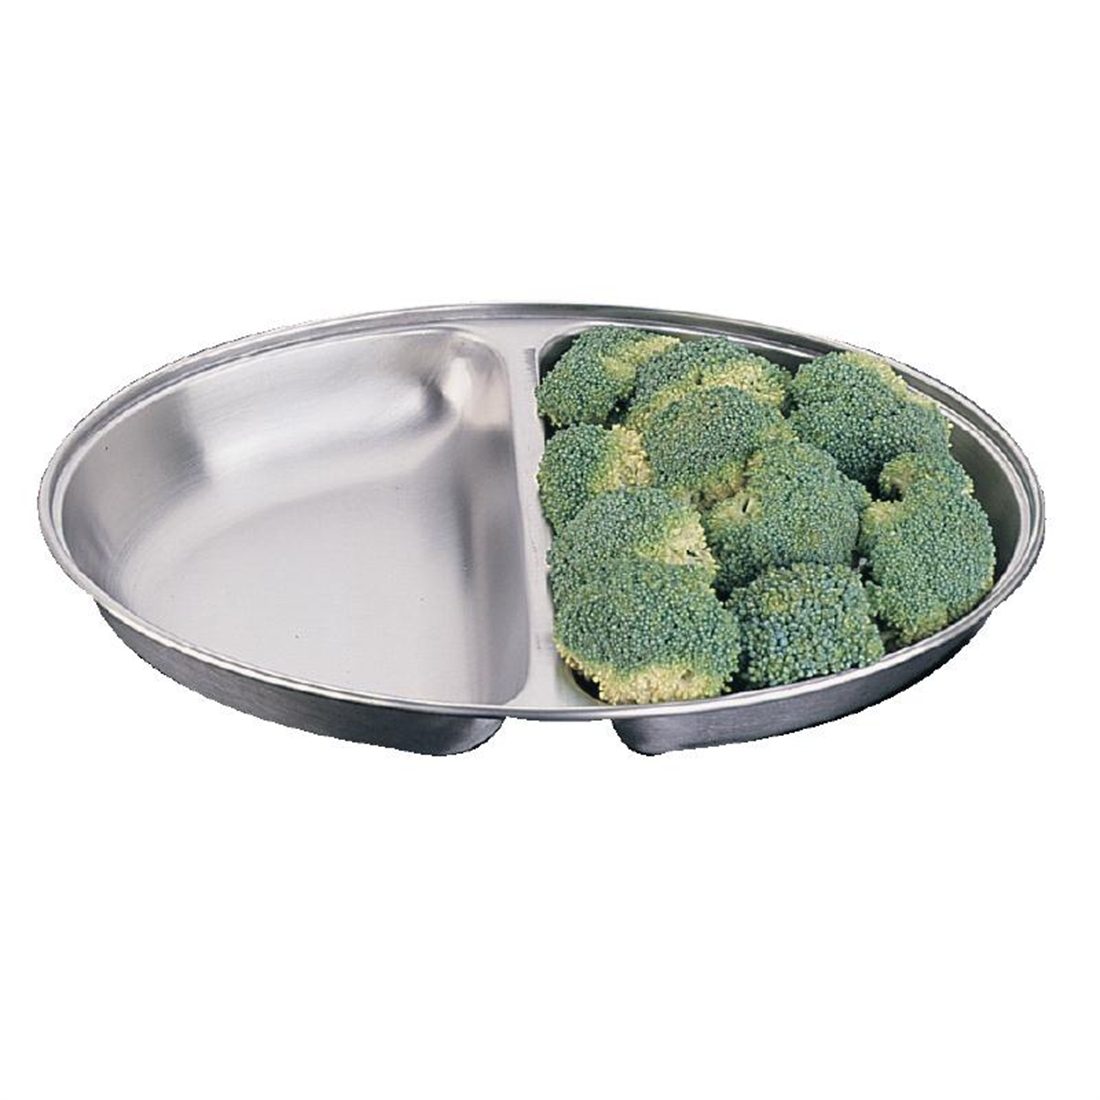 "Olympia Oval Vegetable Dish Two Compartments 200mm"